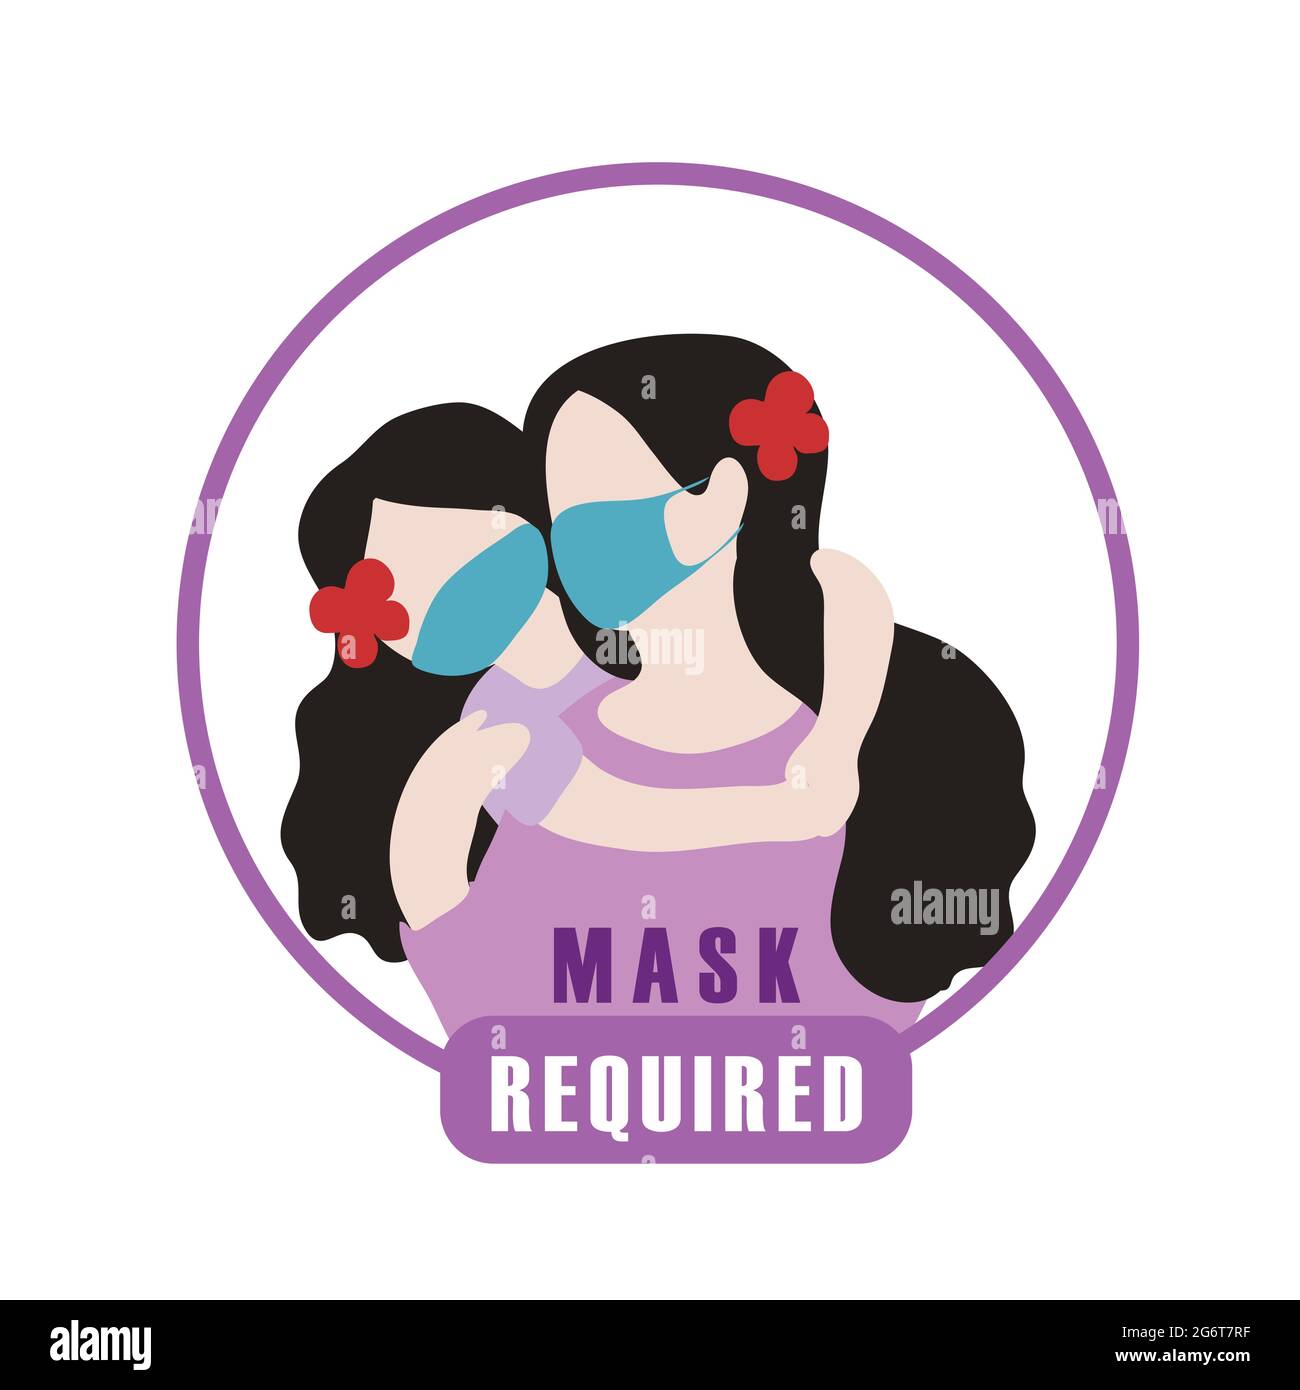 Face mask required sign. New normal wearing mask icons. Women wearing masks. Stock Vector